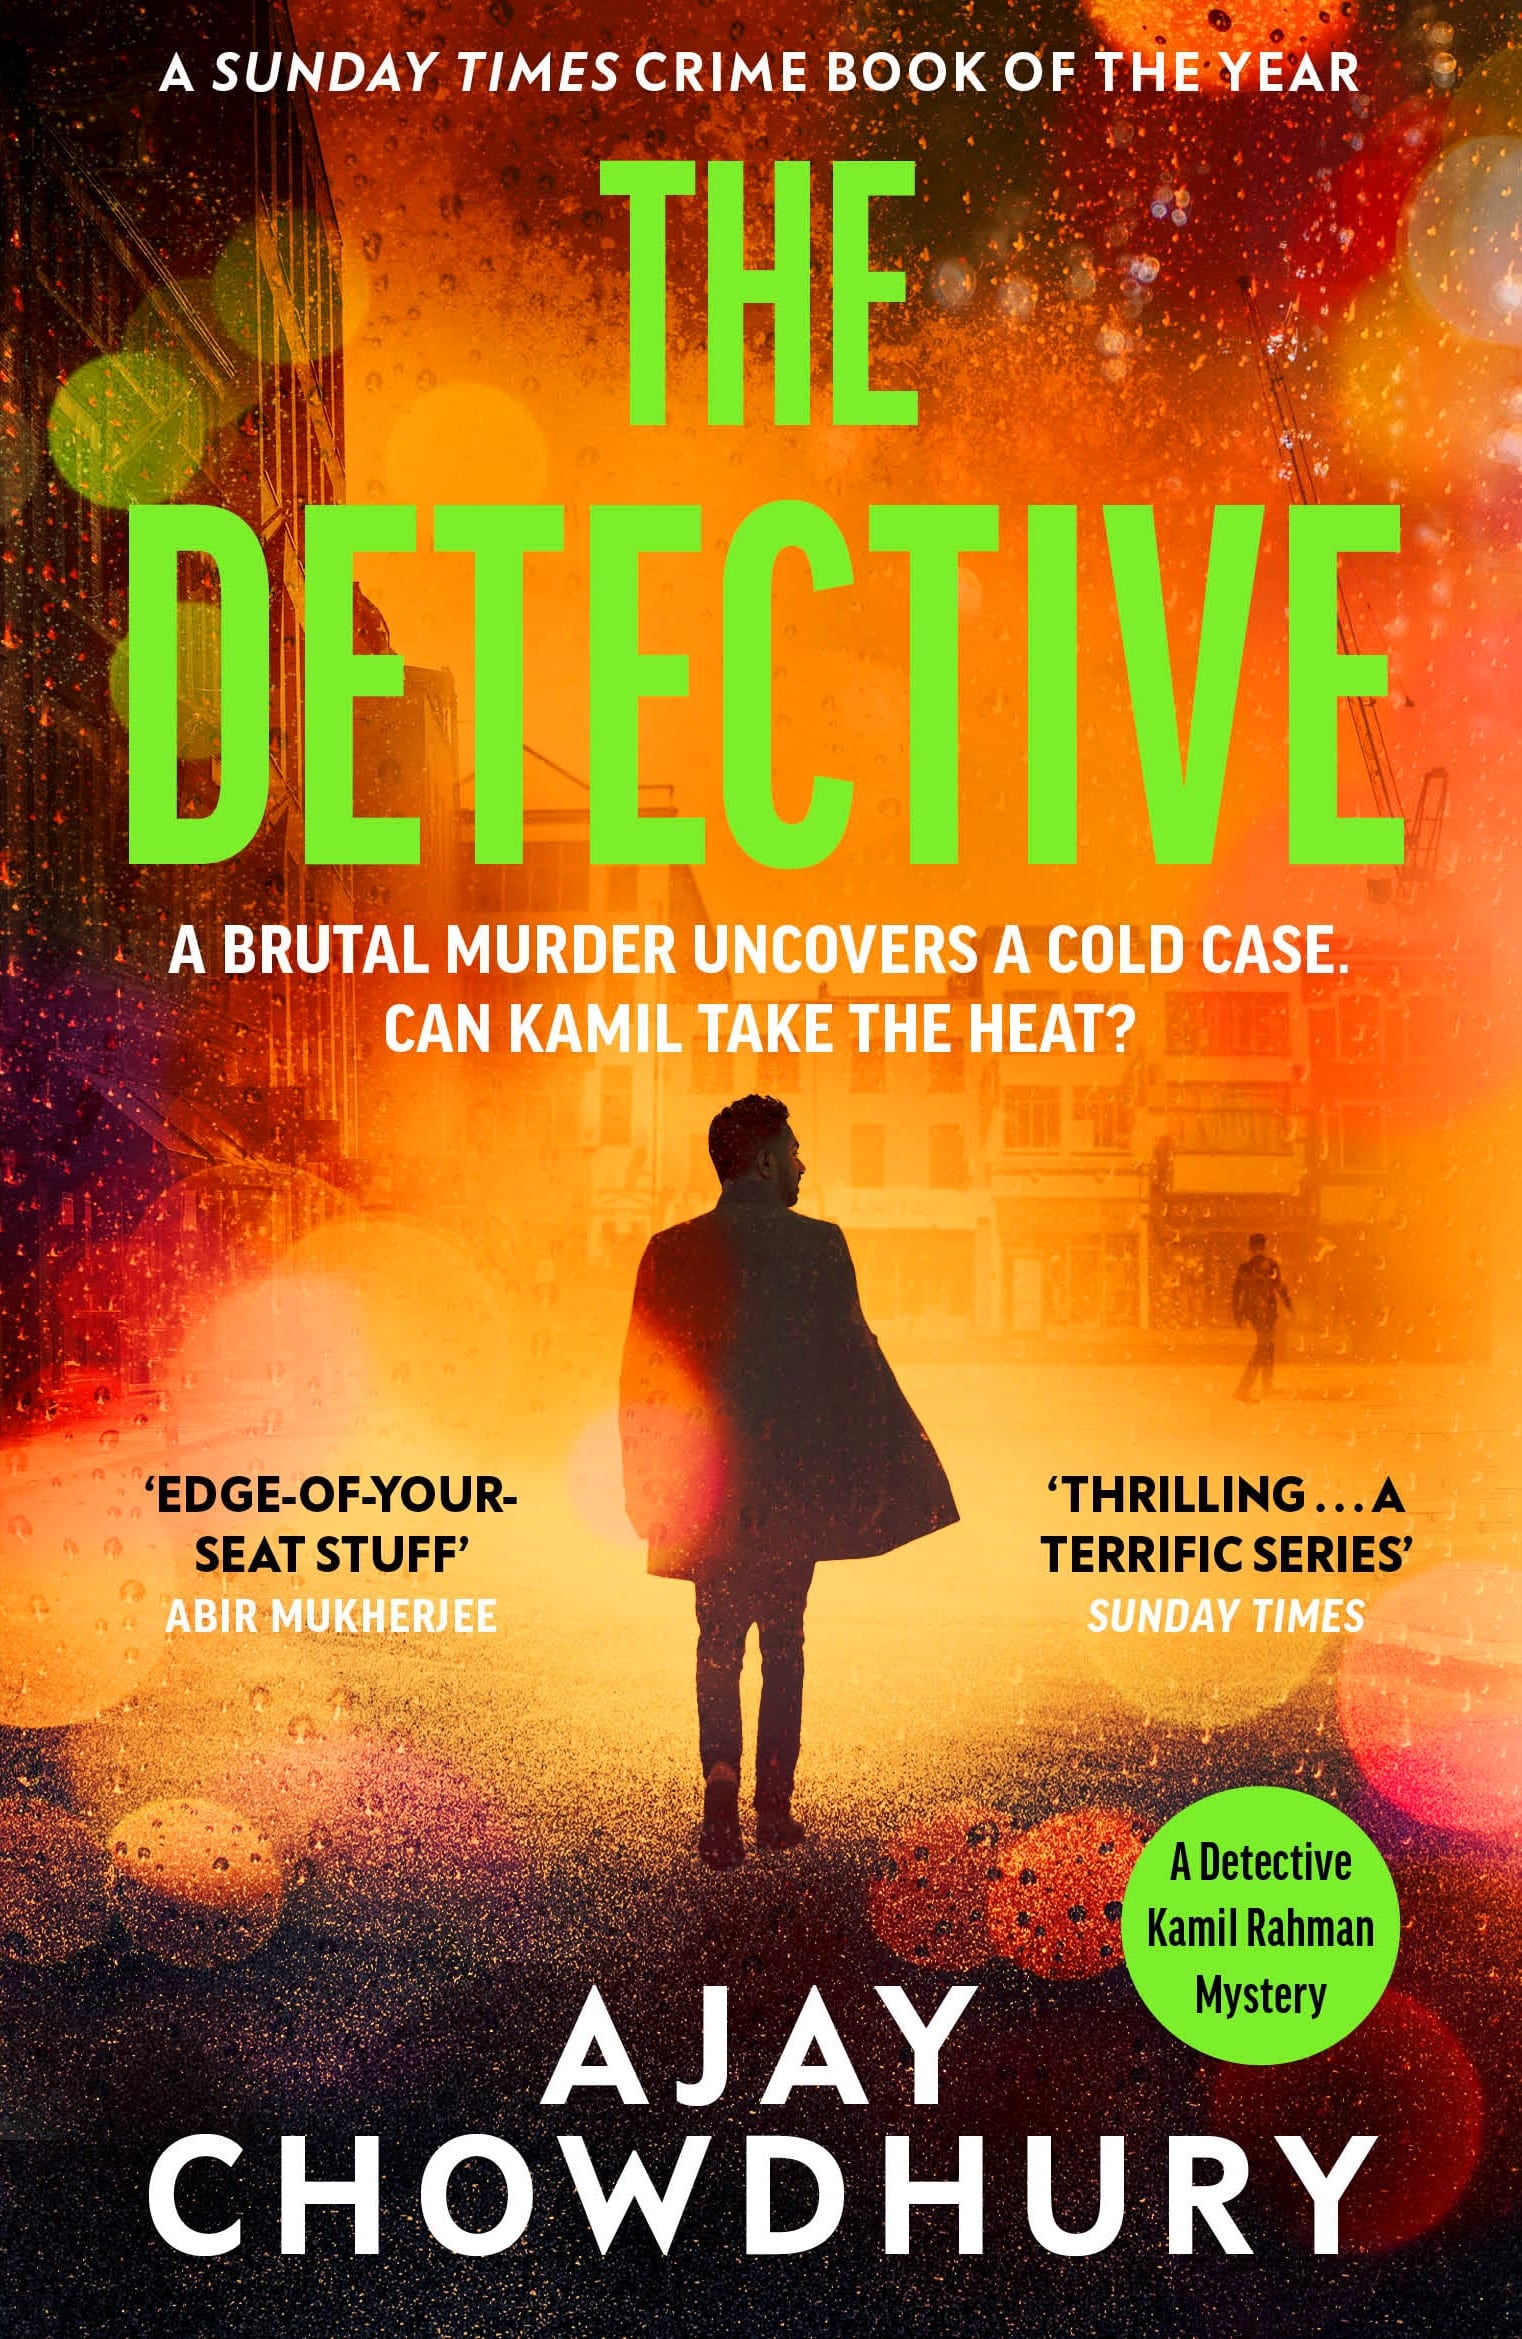 The Detective by Ajay Chowdhury book cover